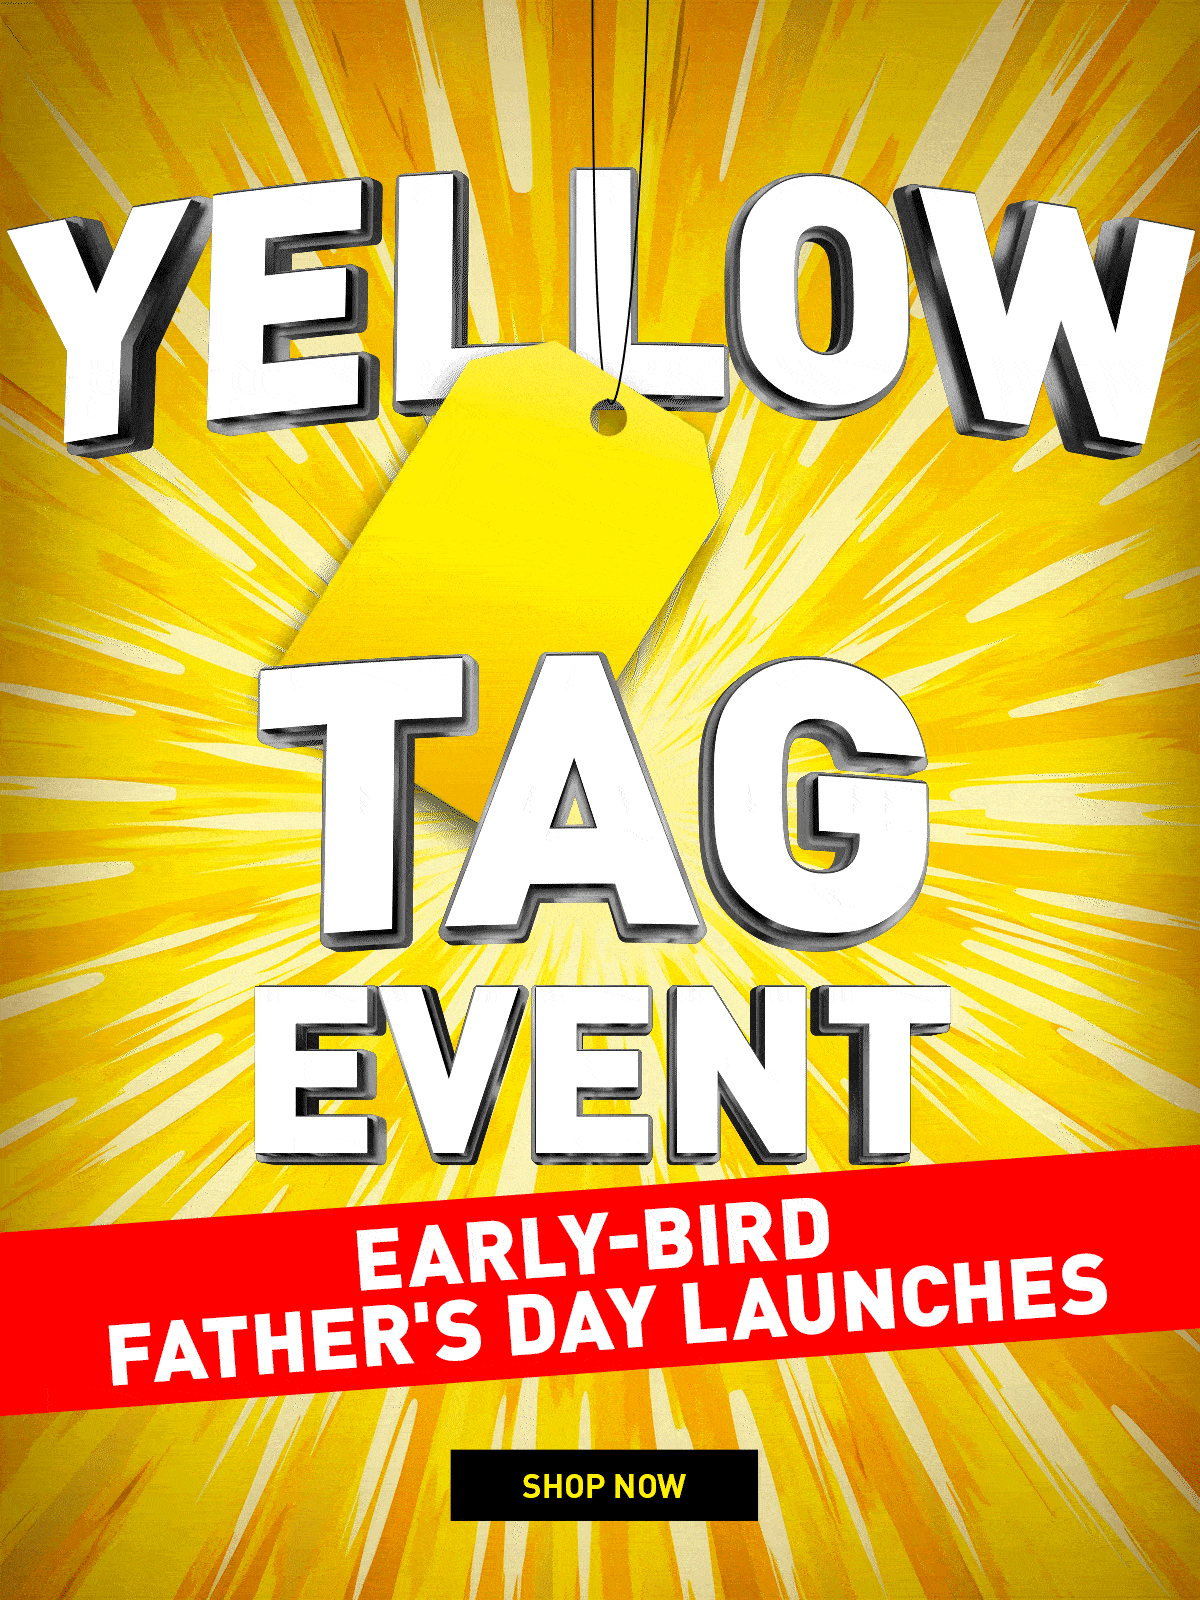 Yellow tag event - Early bird father's day launches